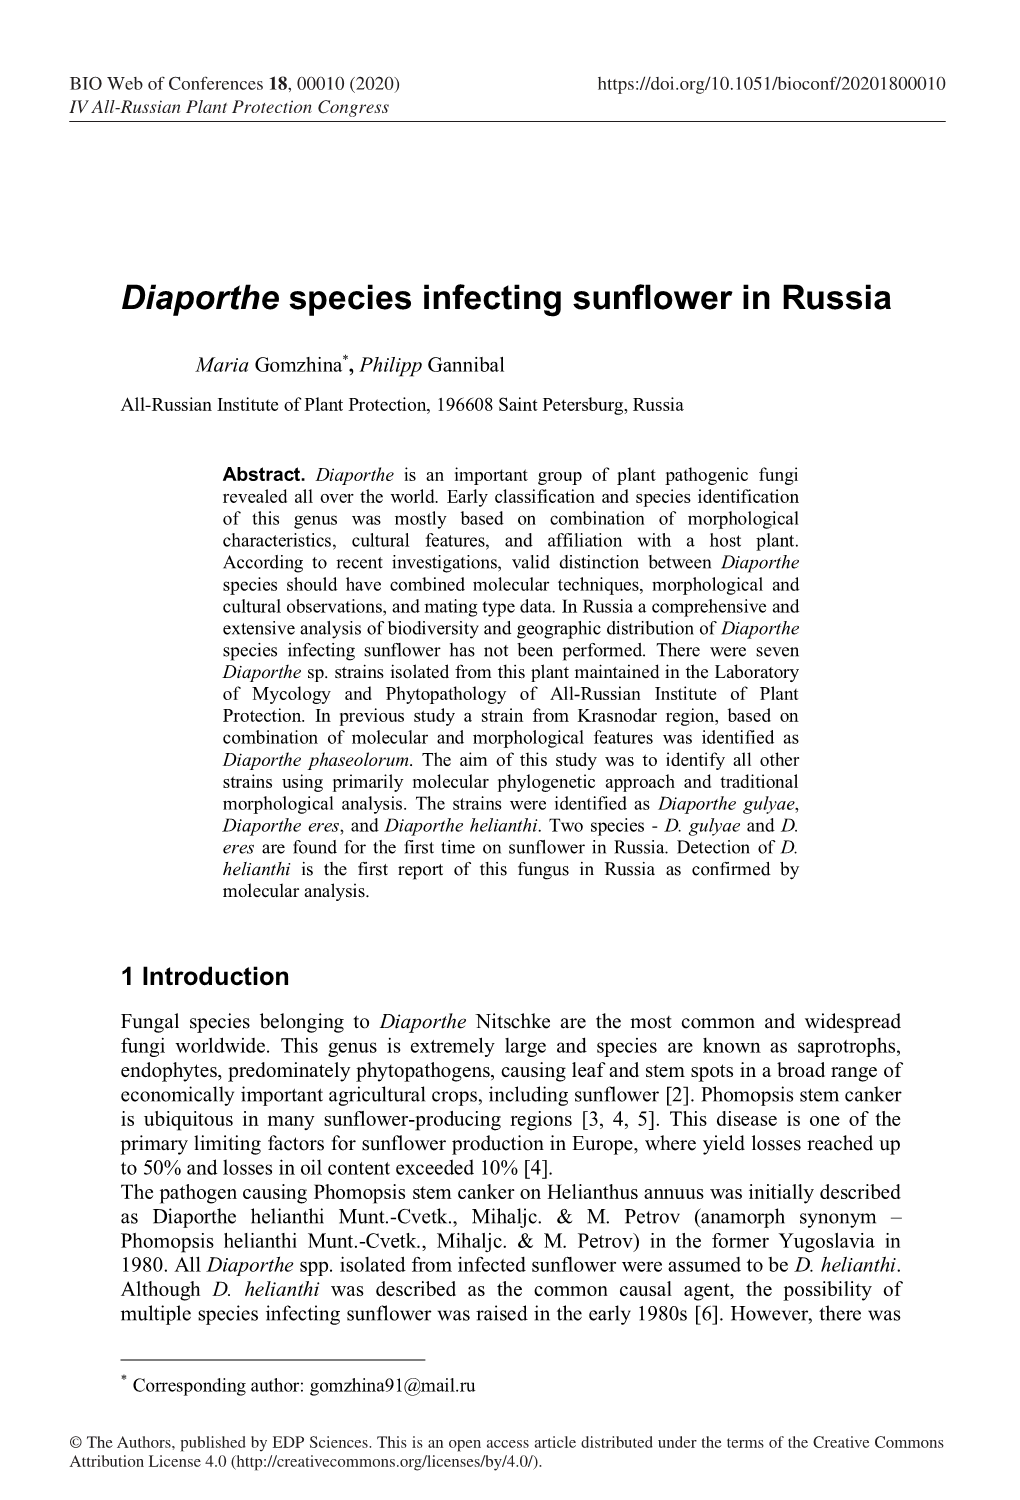 Diaporthe Species Infecting Sunflower in Russia